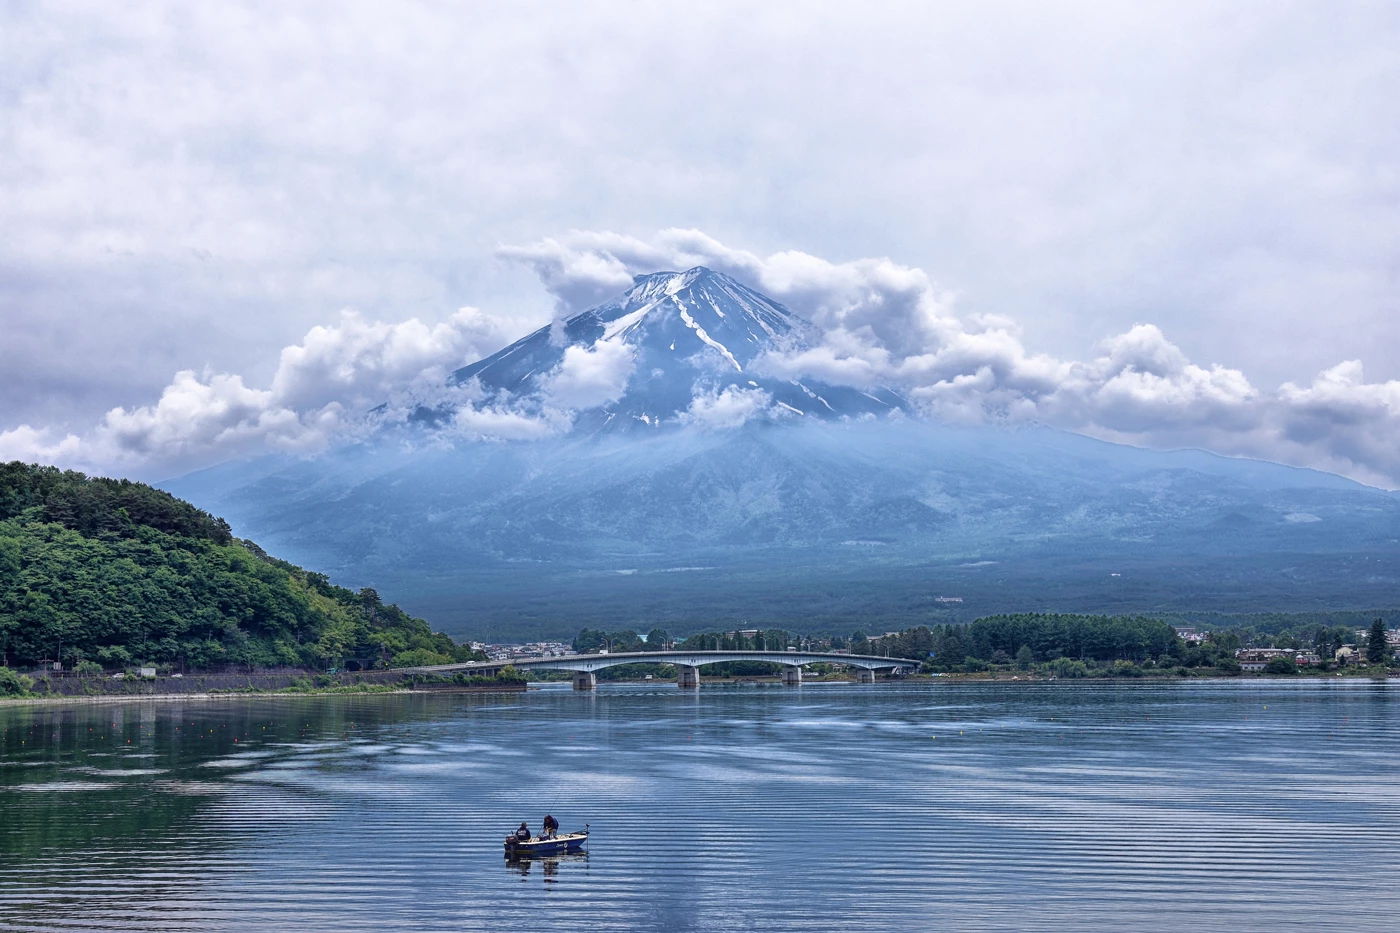 A scenic landscape across Japan with a lake and mountain in the background